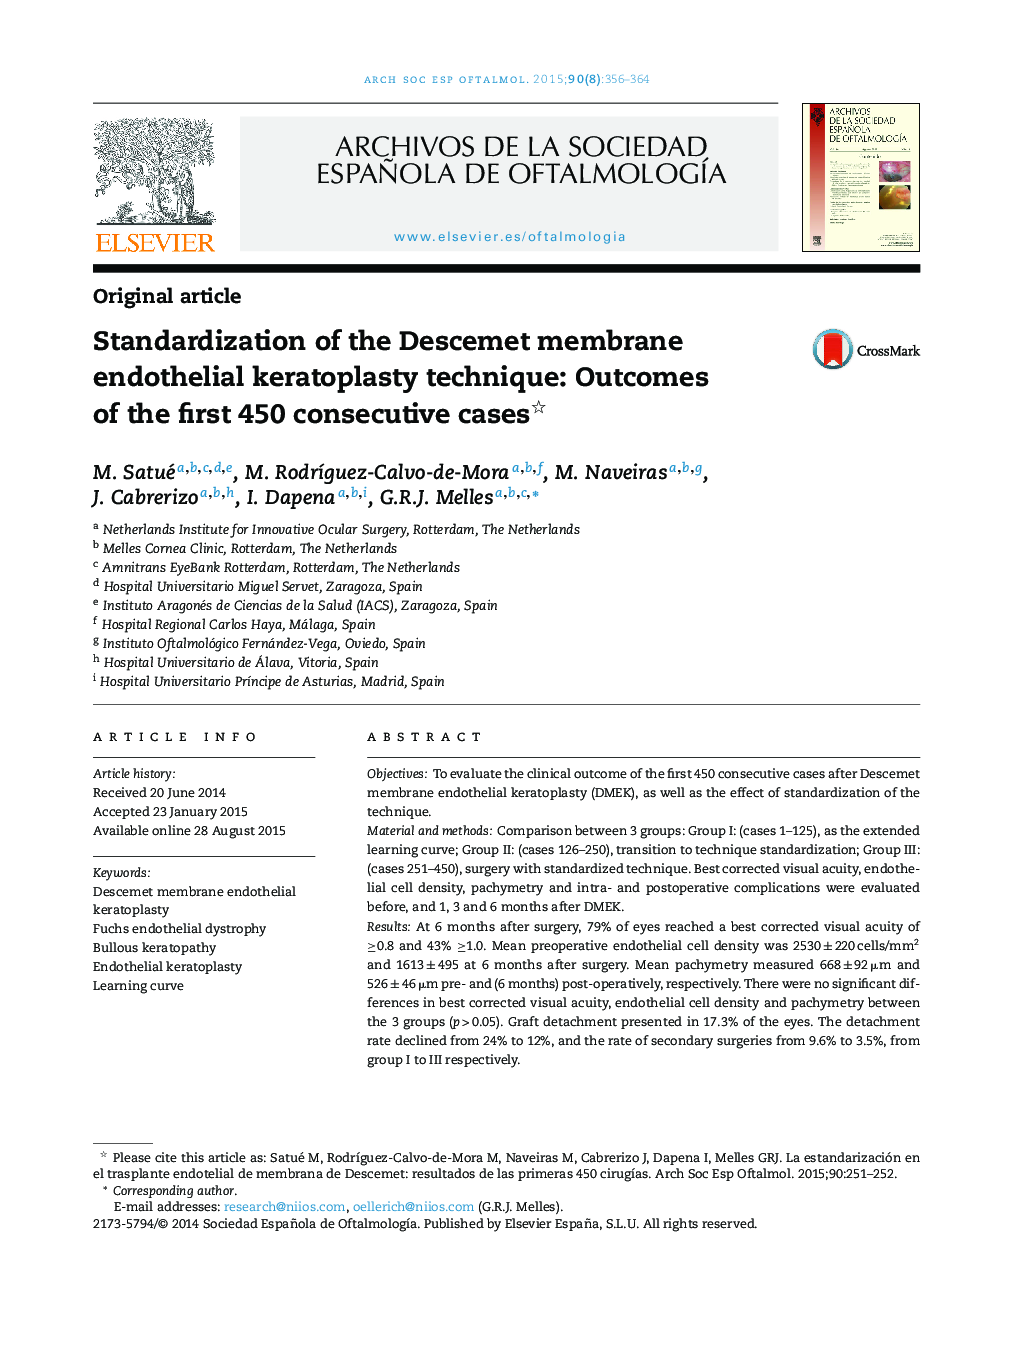 Standardization of the Descemet membrane endothelial keratoplasty technique: Outcomes of the first 450 consecutive cases 